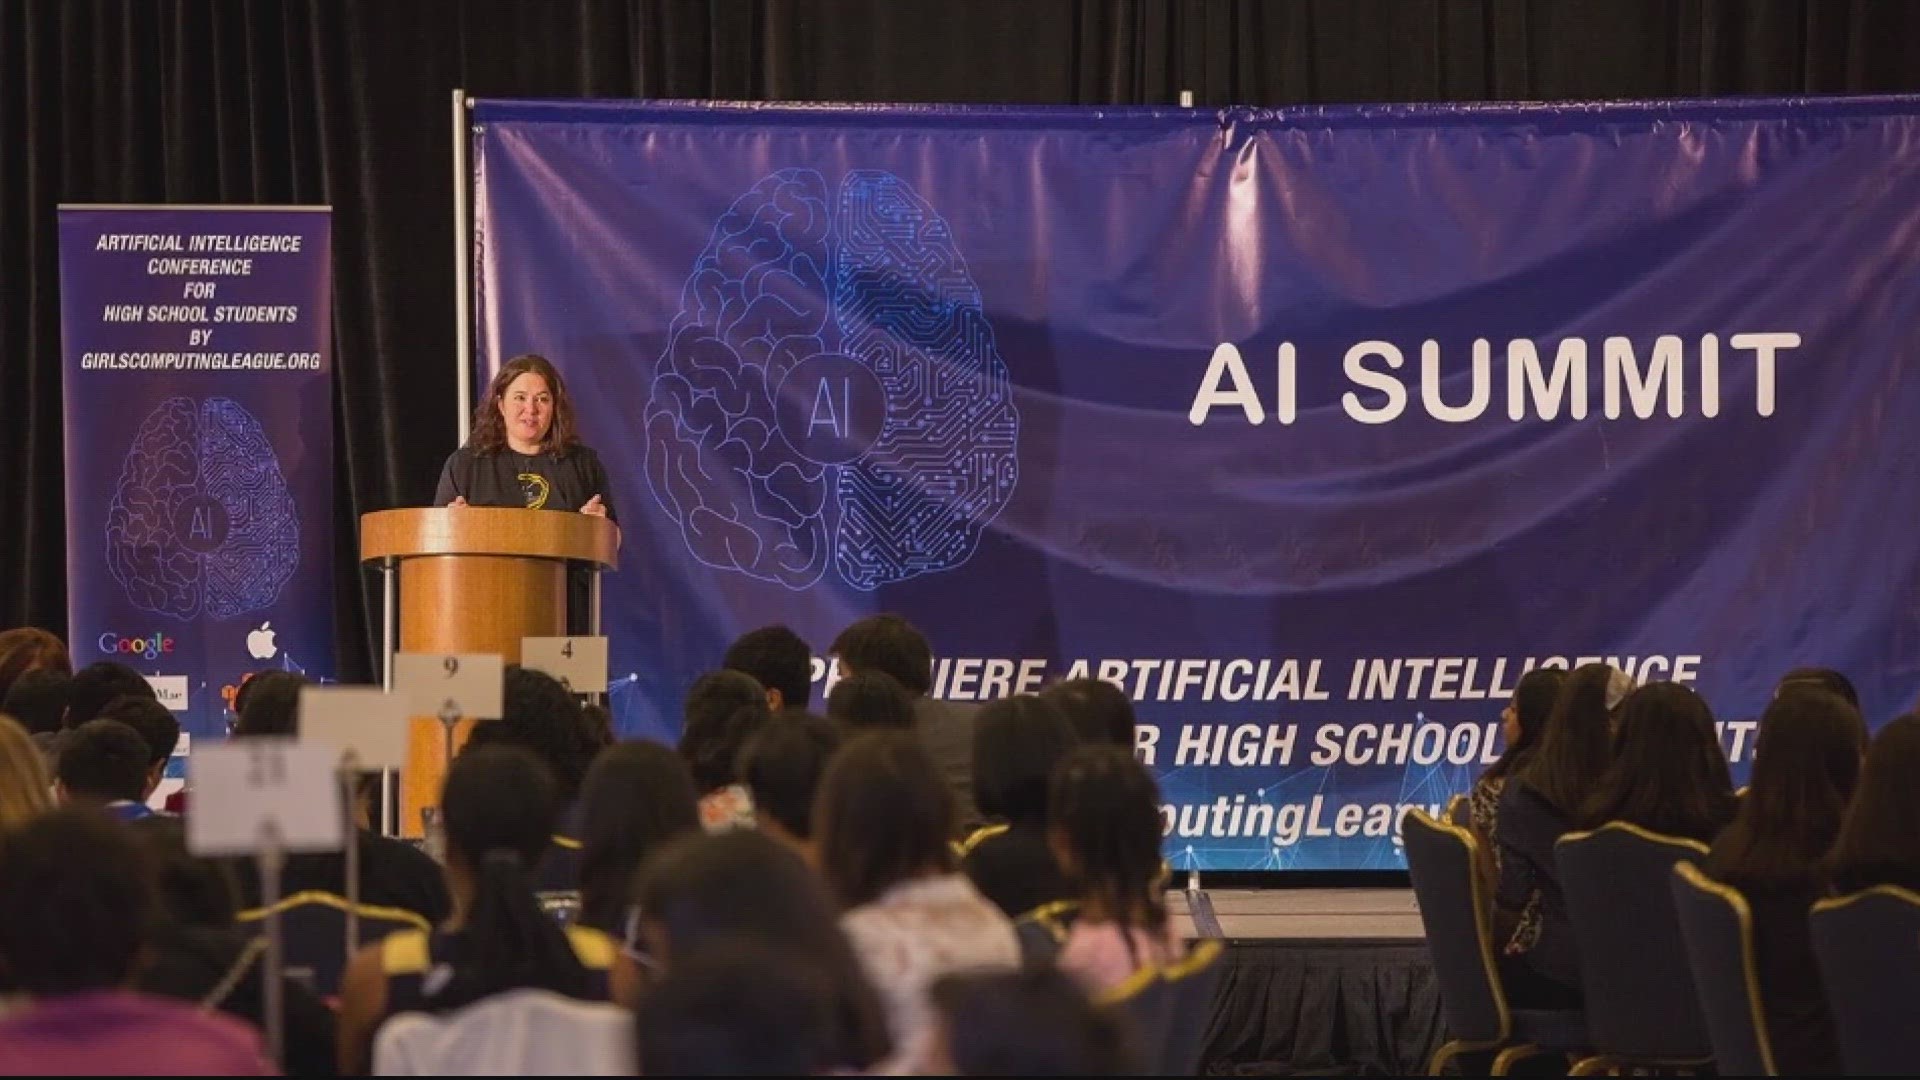 Students get the chance to meet leaders in the field of artificial intelligence.